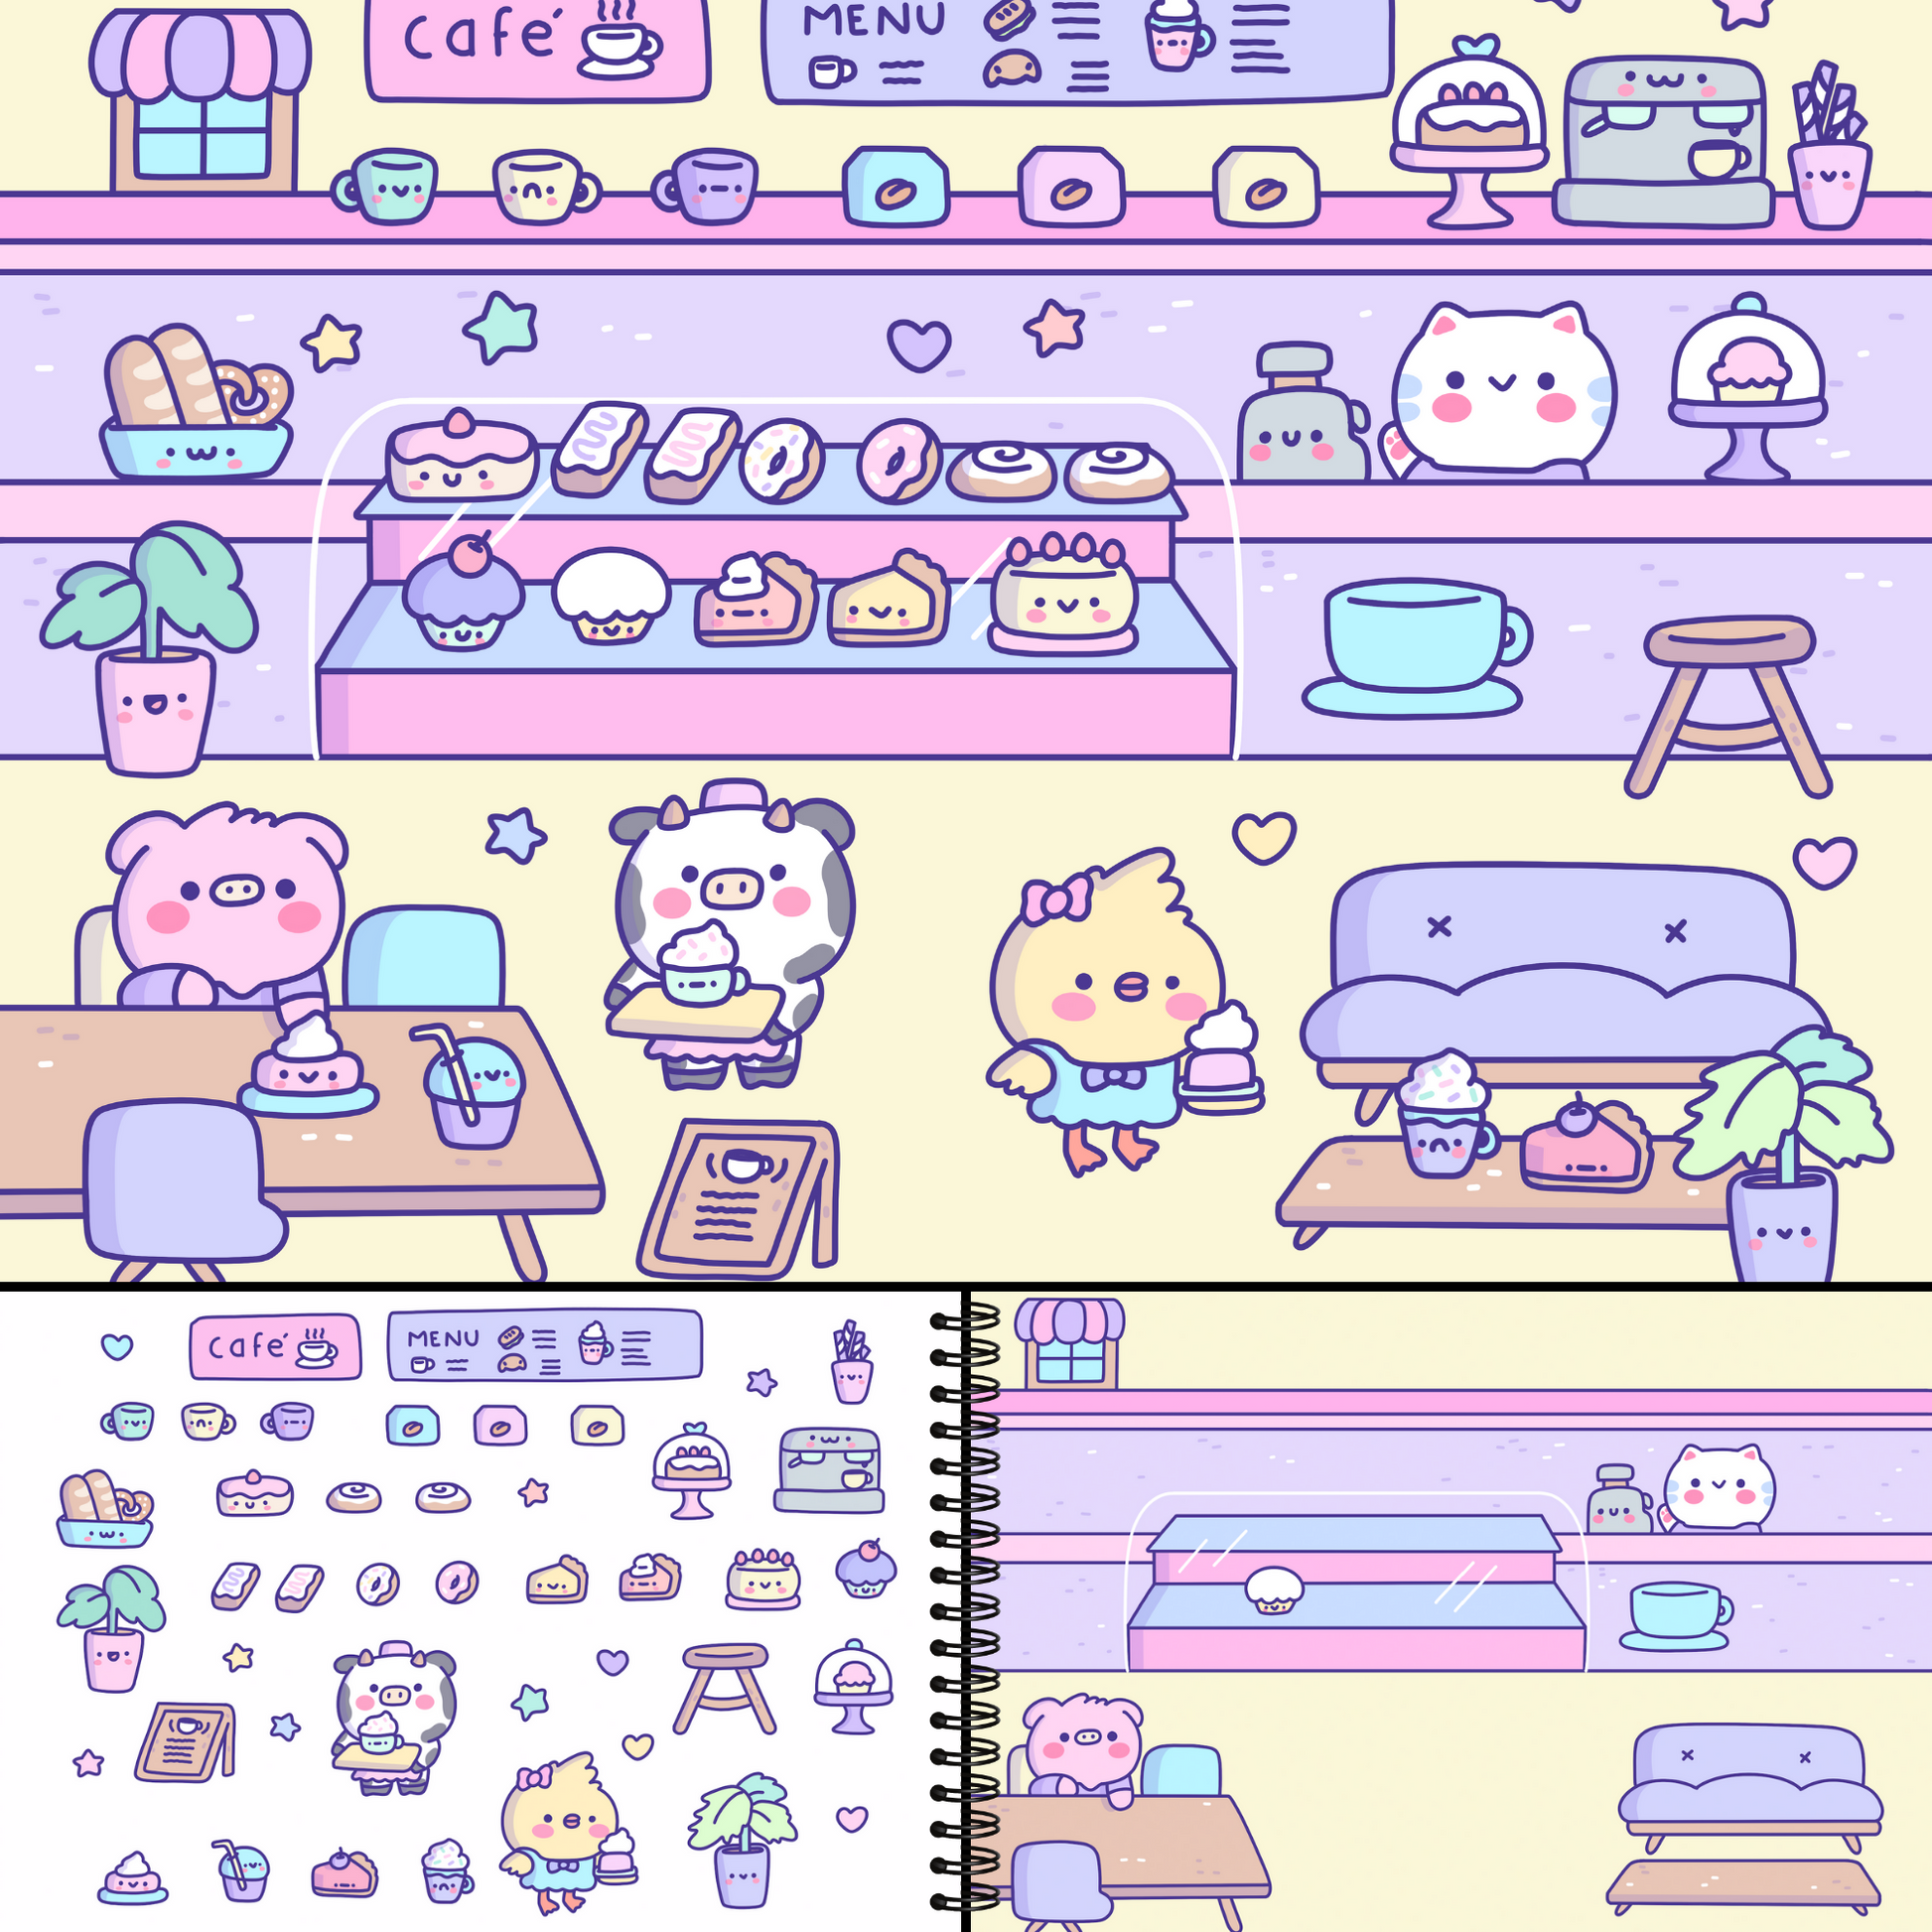 Cute Foods Around Town Activity Book by Cupkin: Lay Flat Side by Side  Sticker Books + Kawaii Coloring Books - Over 500 Cute Kawaii Stickers + 12